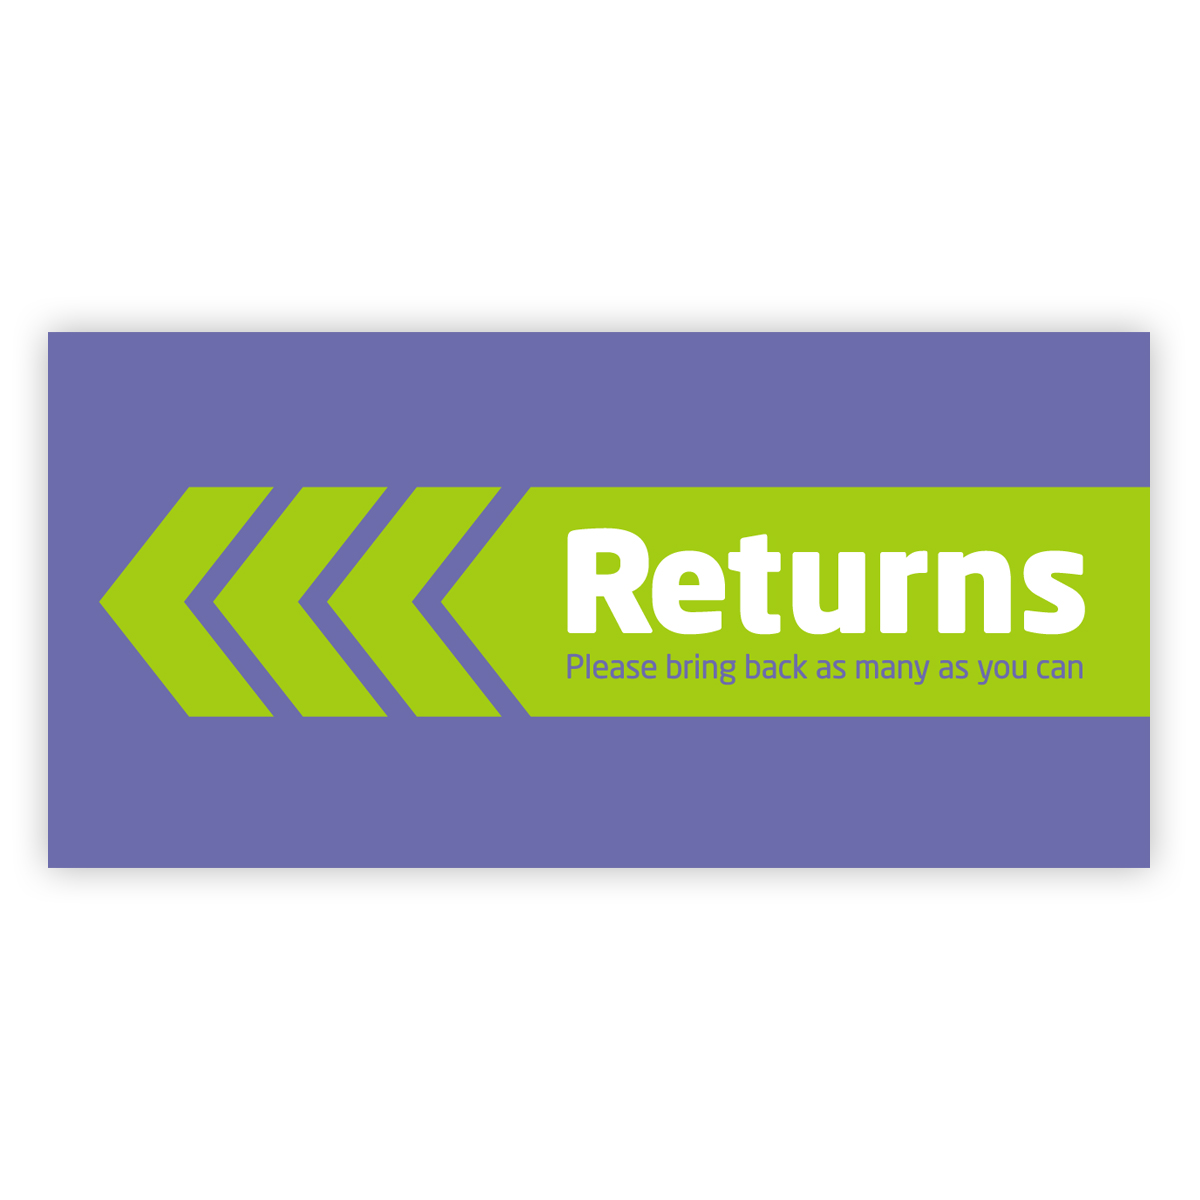 Leaflet - Returns: please bring back as many as you can 